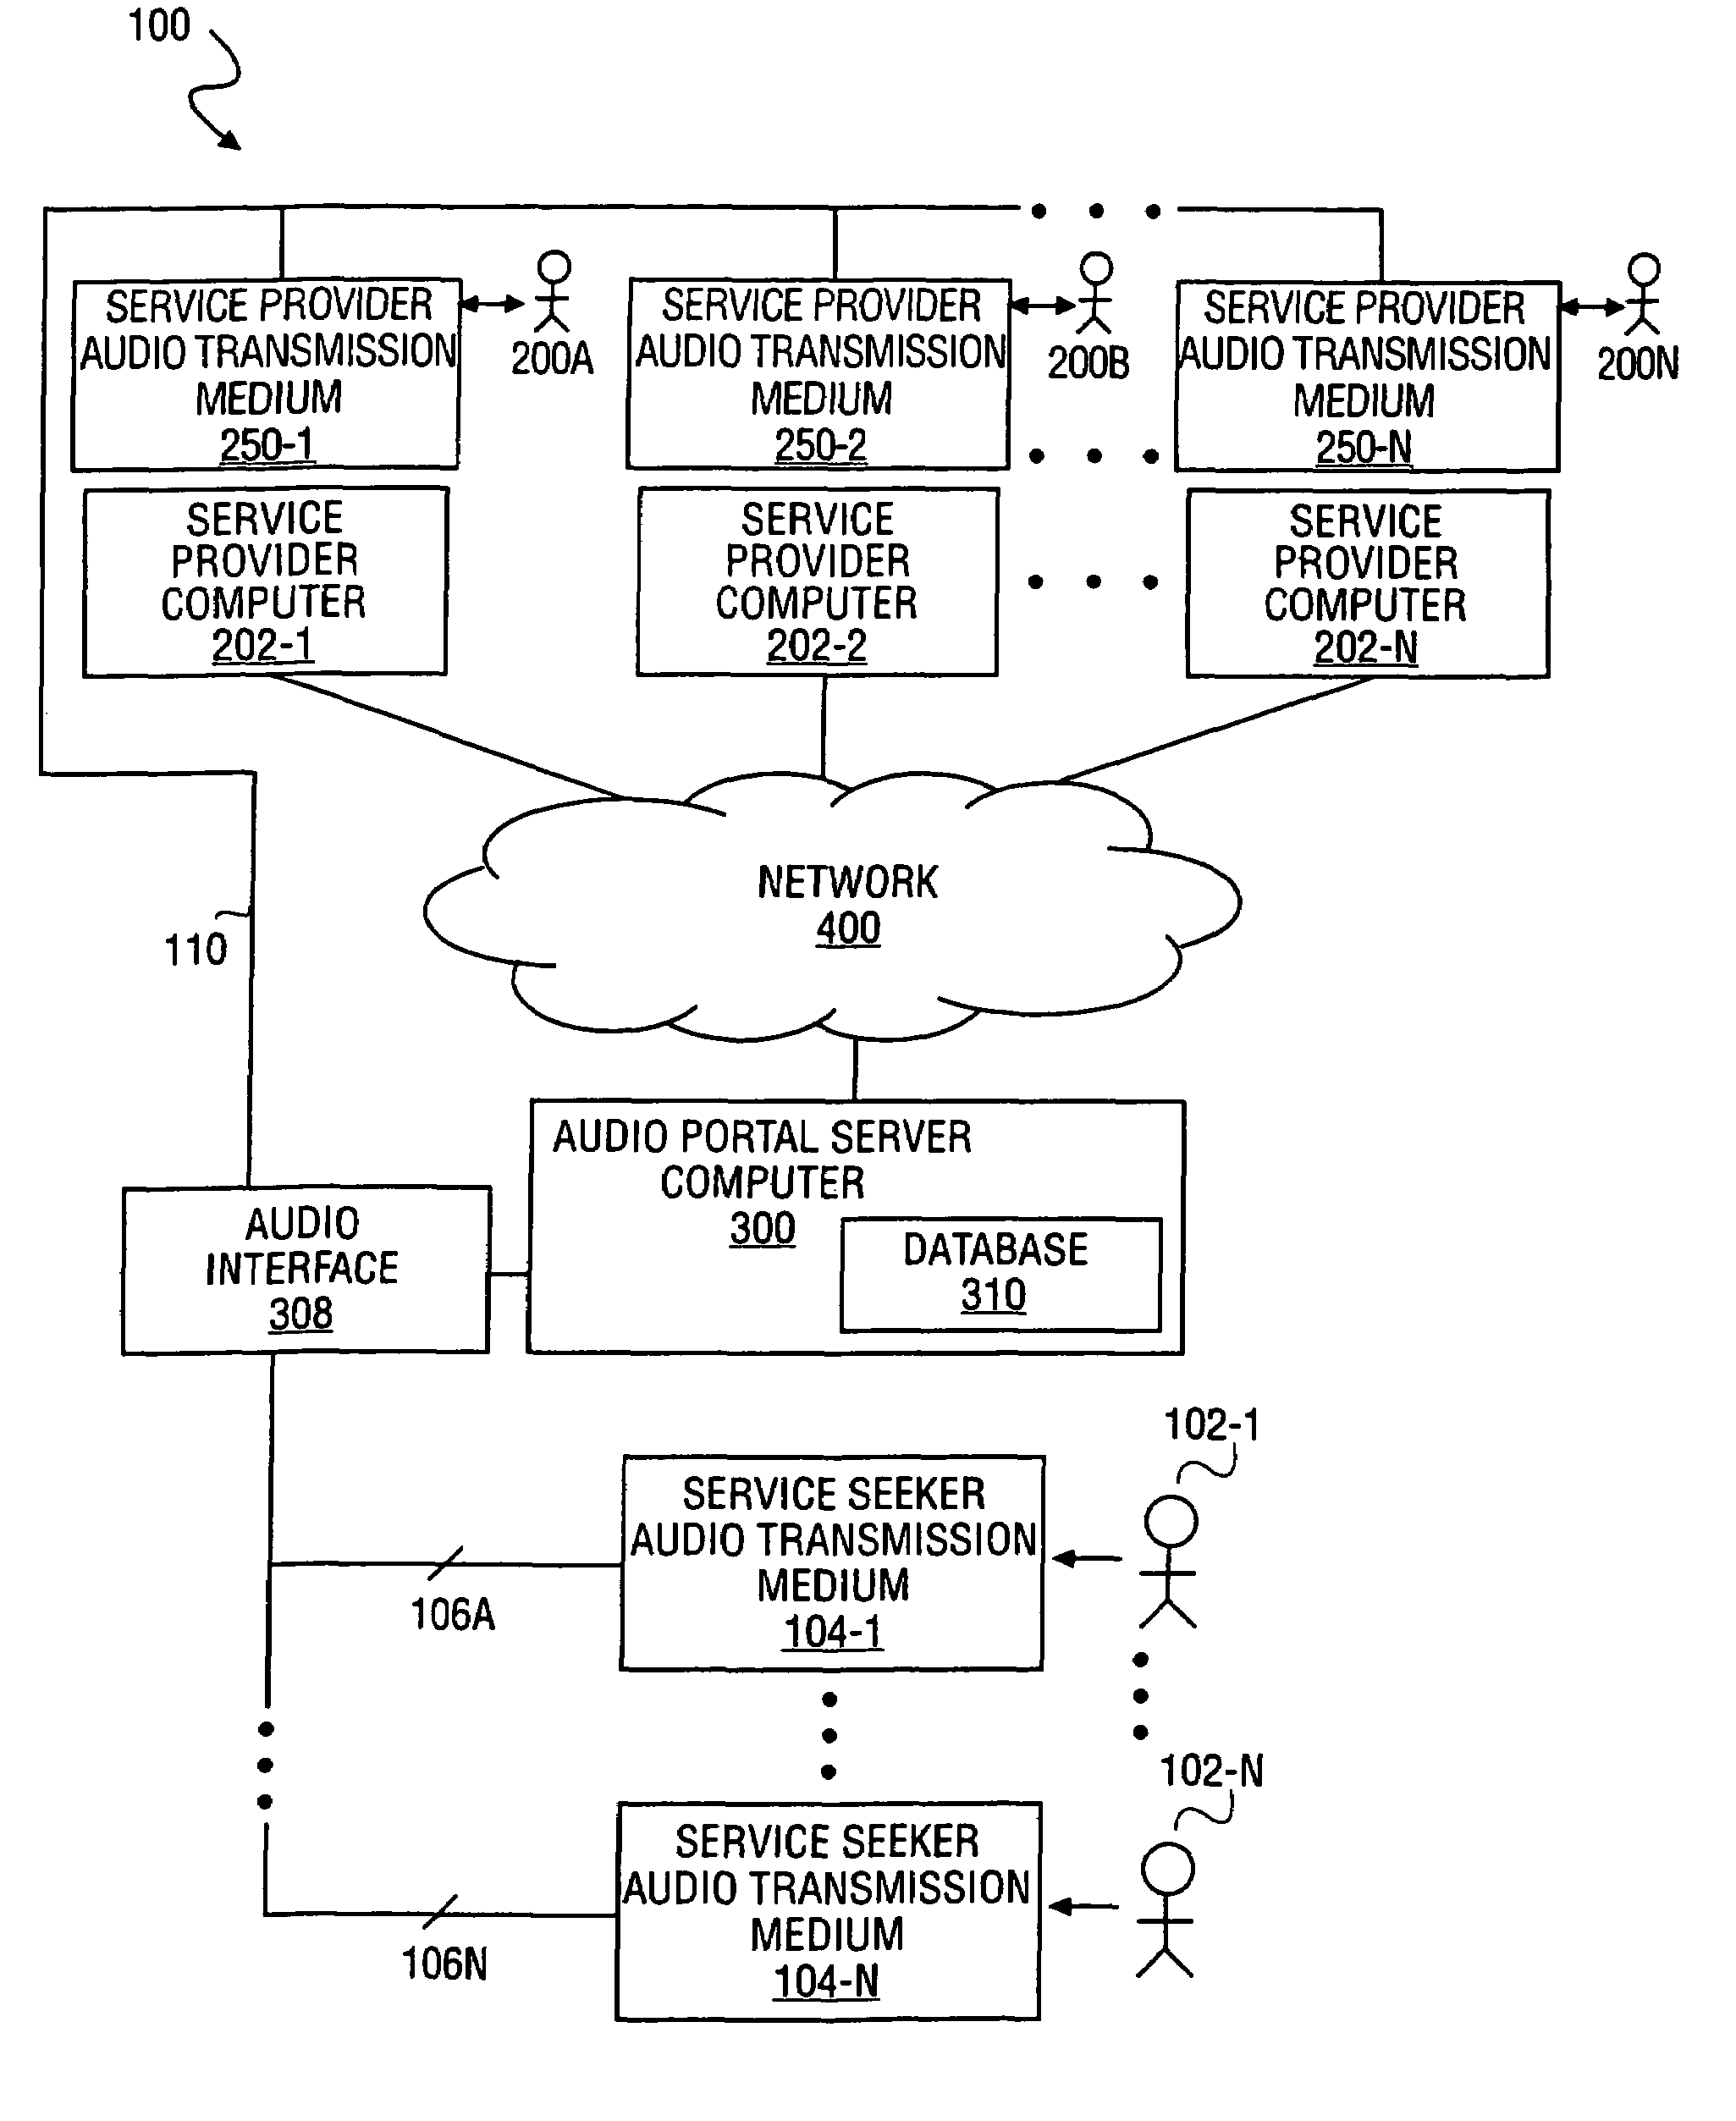 Method and system to connect consumers to information